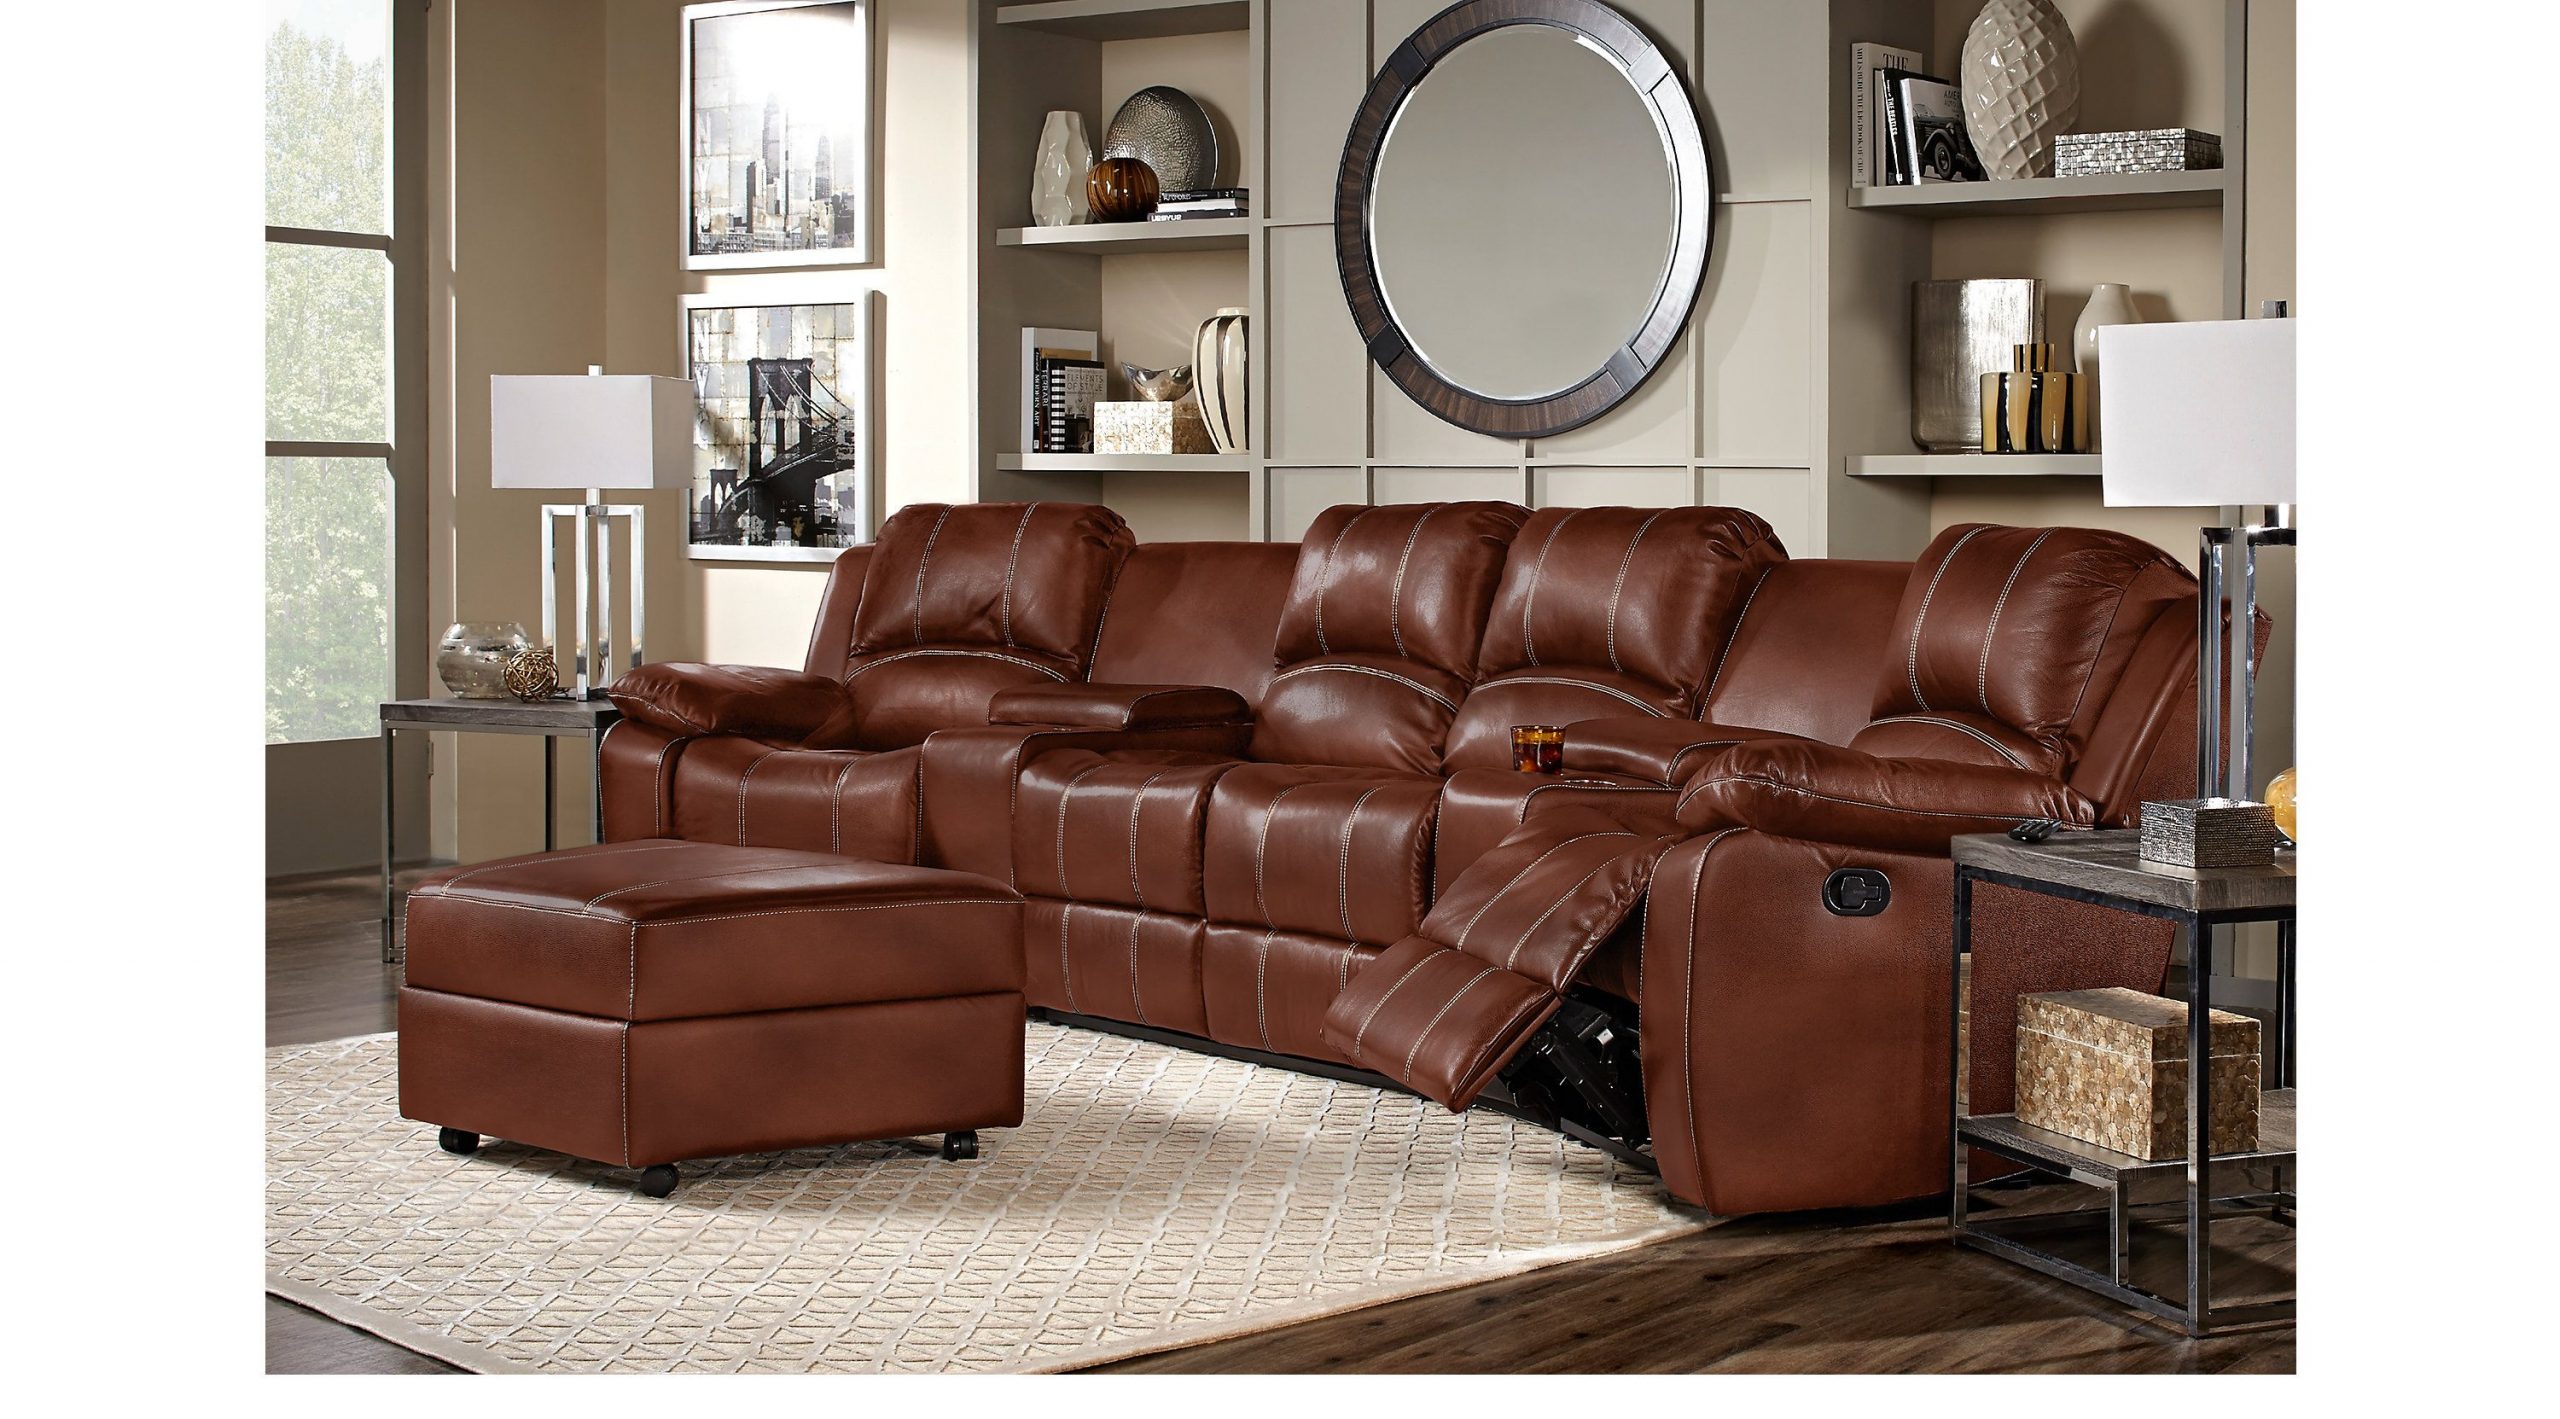 Too Much Leather In Living Room